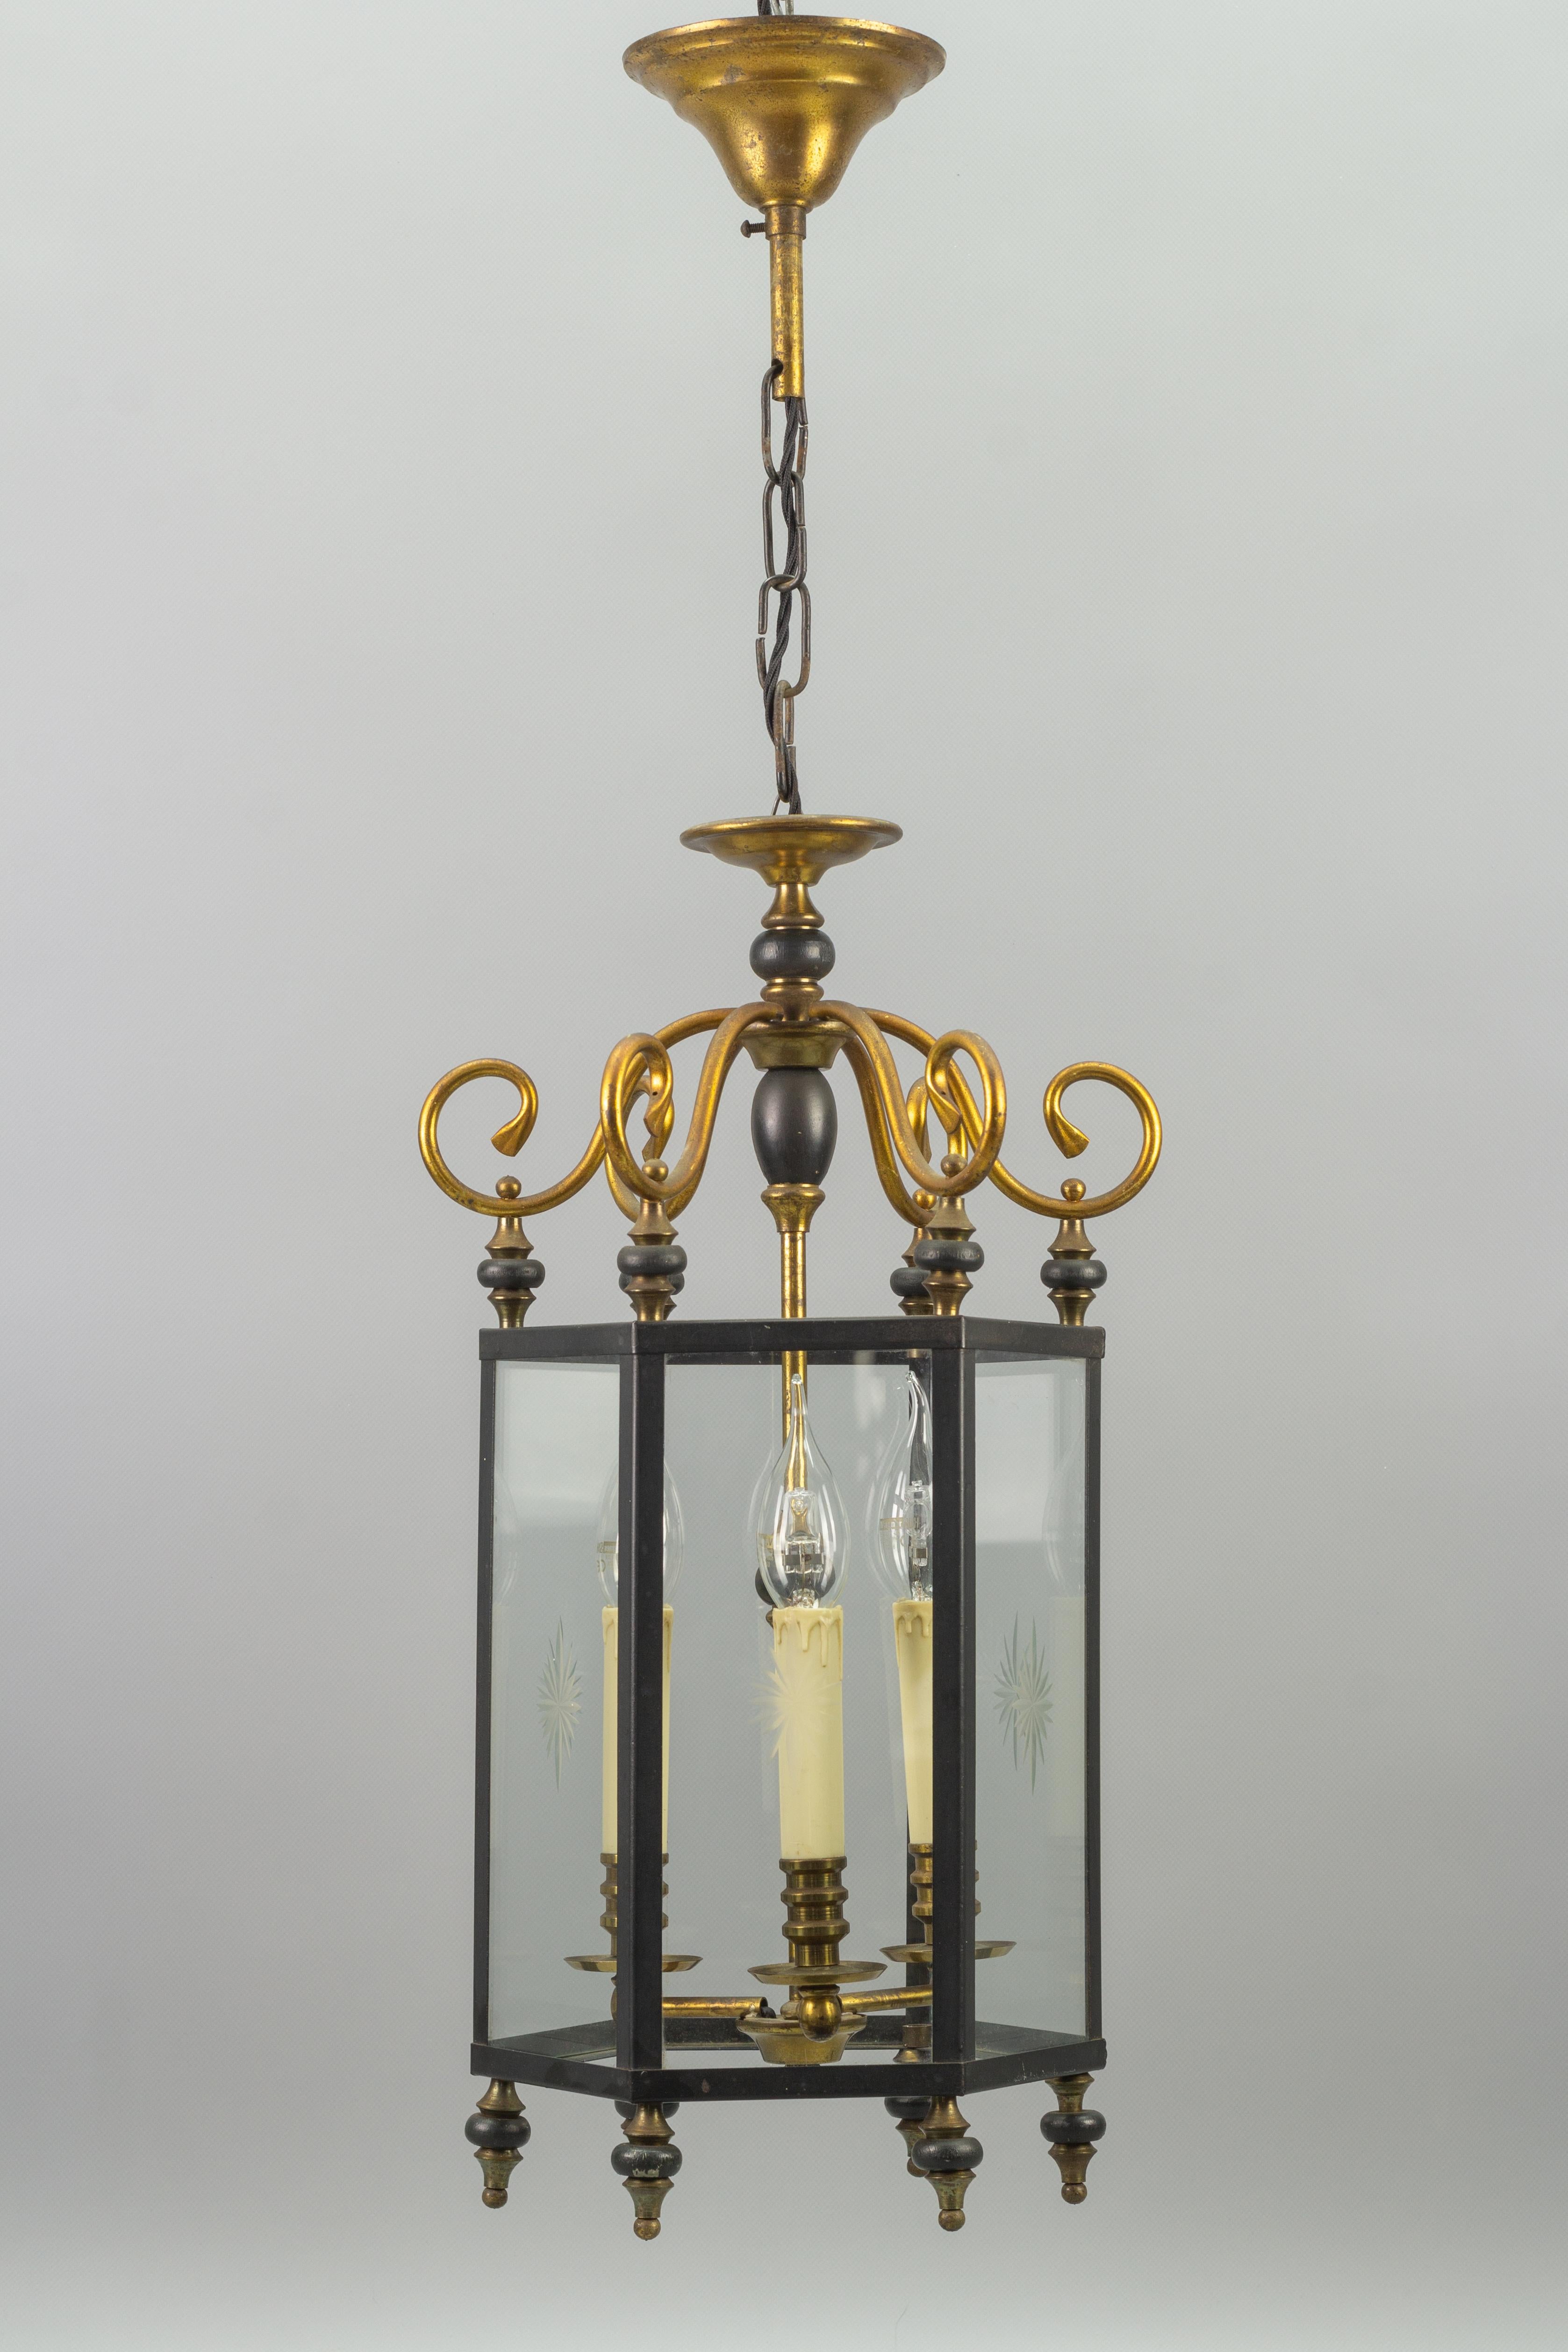 Mid-20th Century Neoclassical Style Brass and Glass Three-Light Hanging Hall Lantern